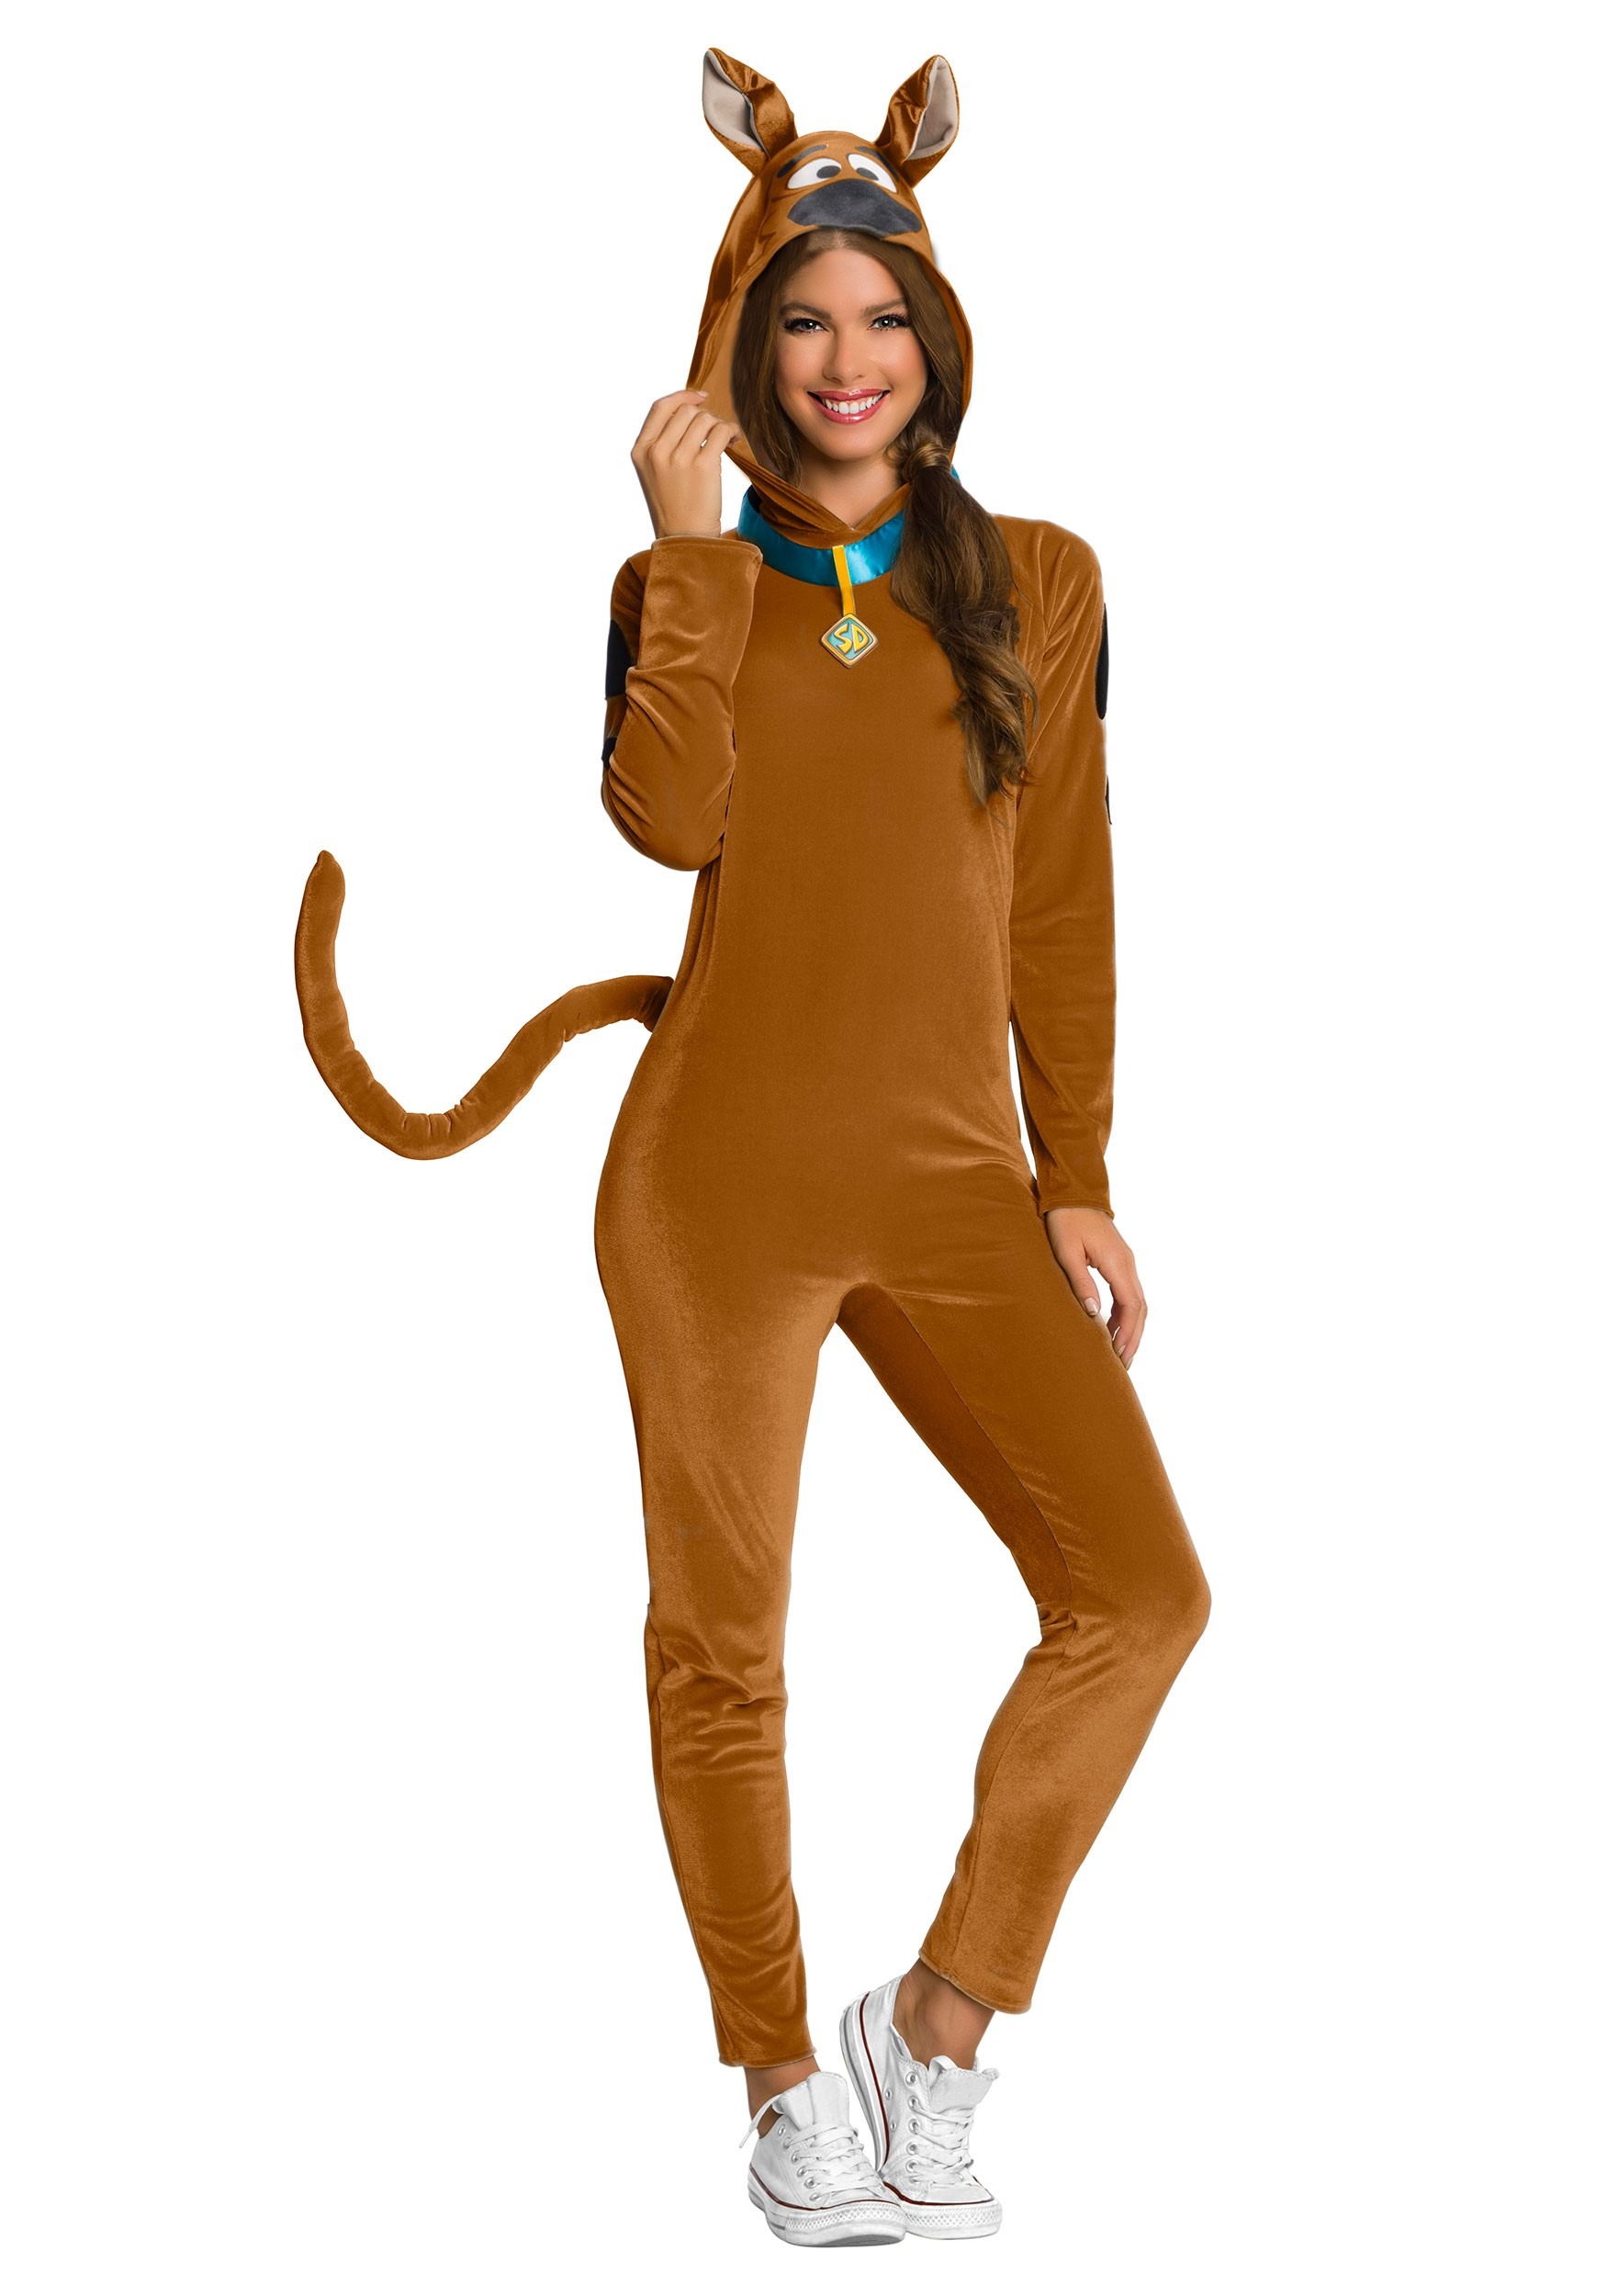 Scooby-Doo Women's Costume Jumpsuit W/ Collar and Tail